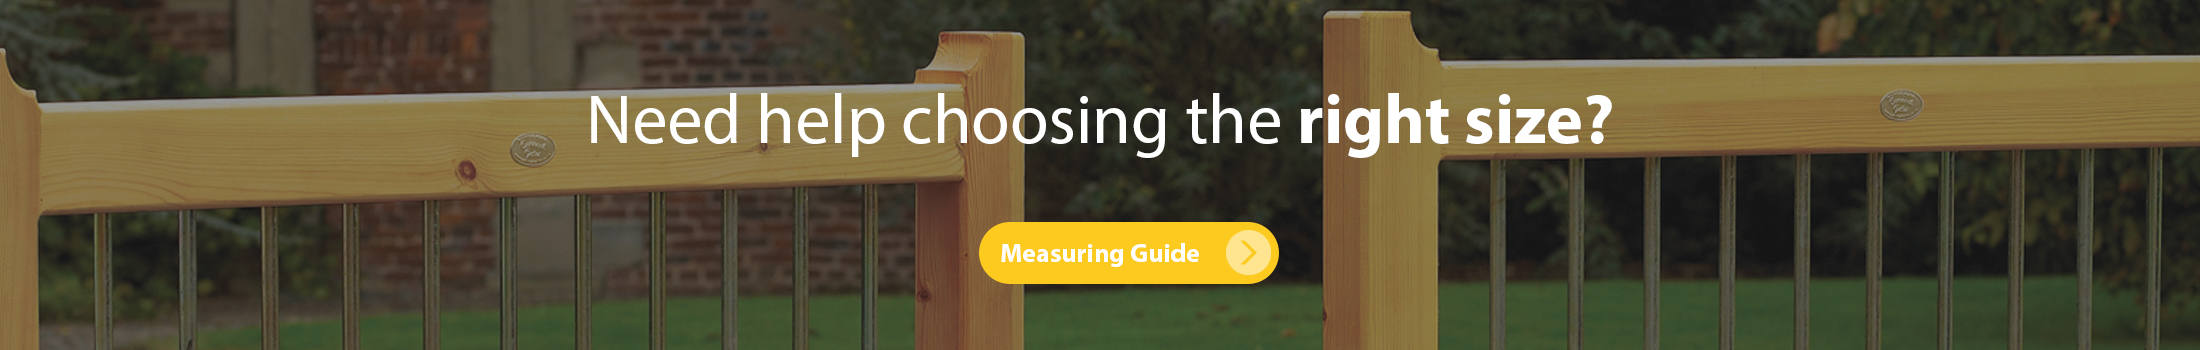 View the measuring guide